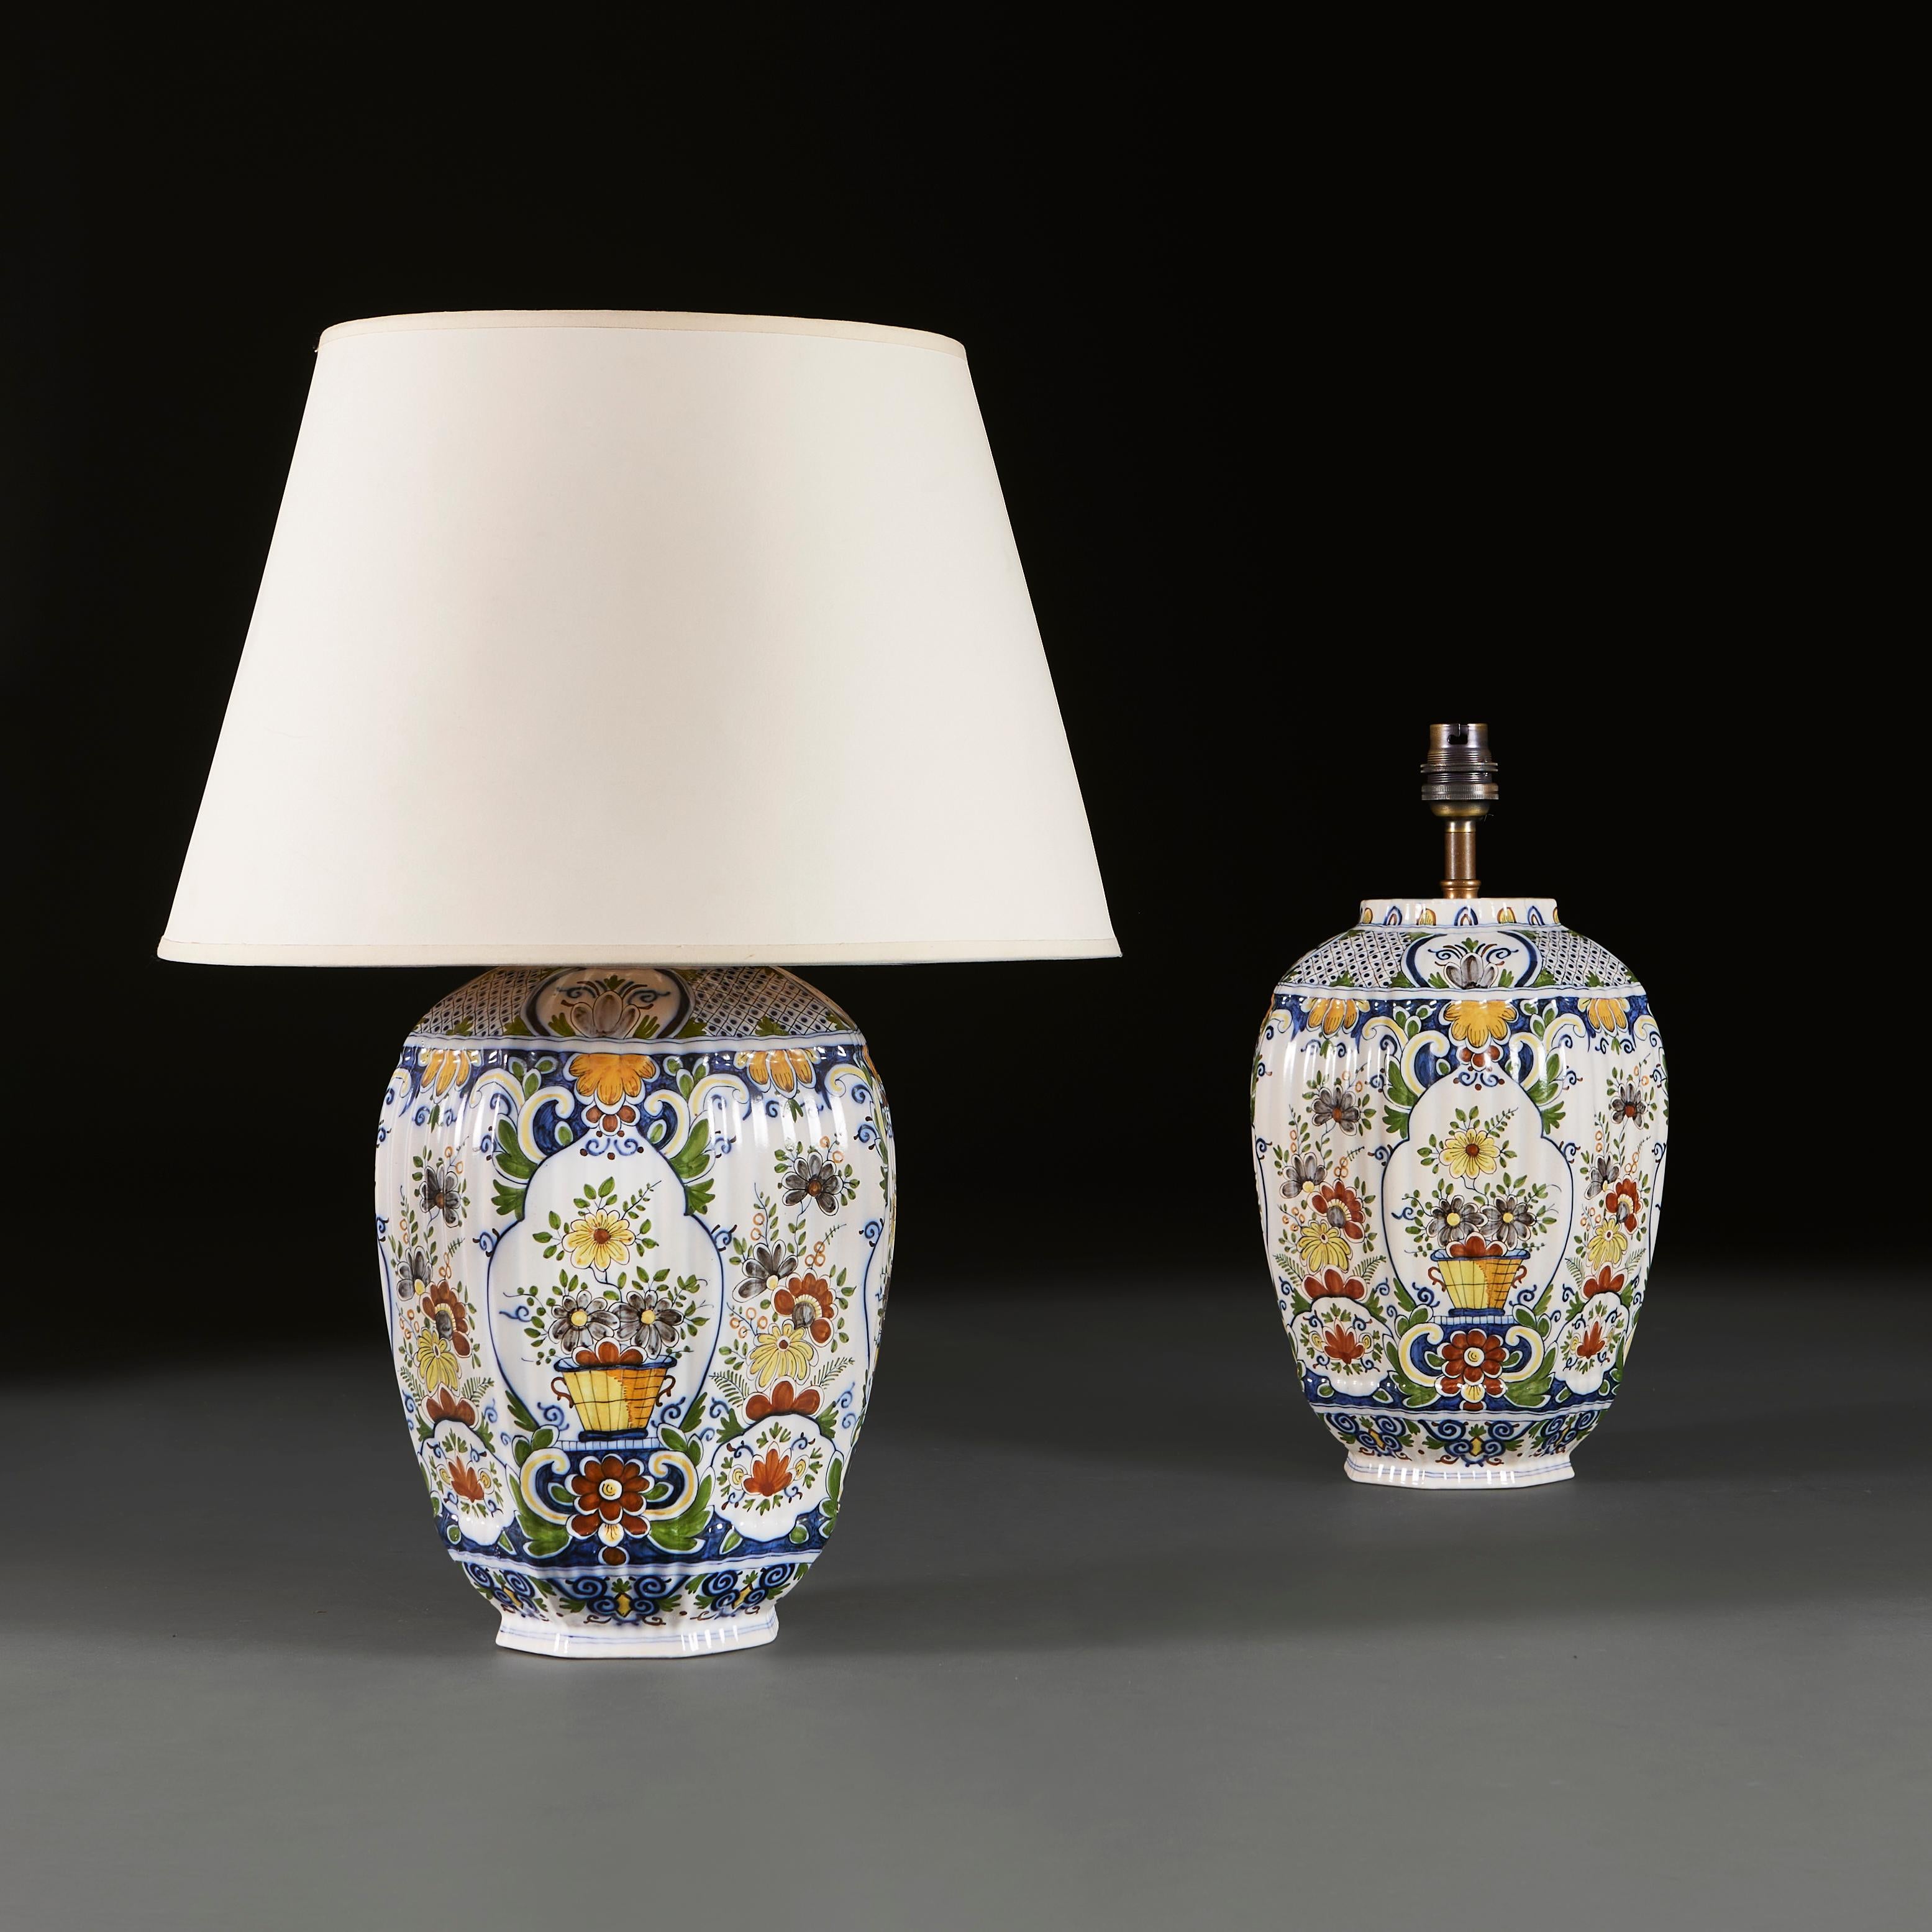 Low countries, circa 1880

A pair of late nineteenth century octagonal faceted Delft vases of large scale, with polychrome floral decorations throughout in the traditional cashmere palette, now mounted as lamps.

Height 35.00cm
Diameter